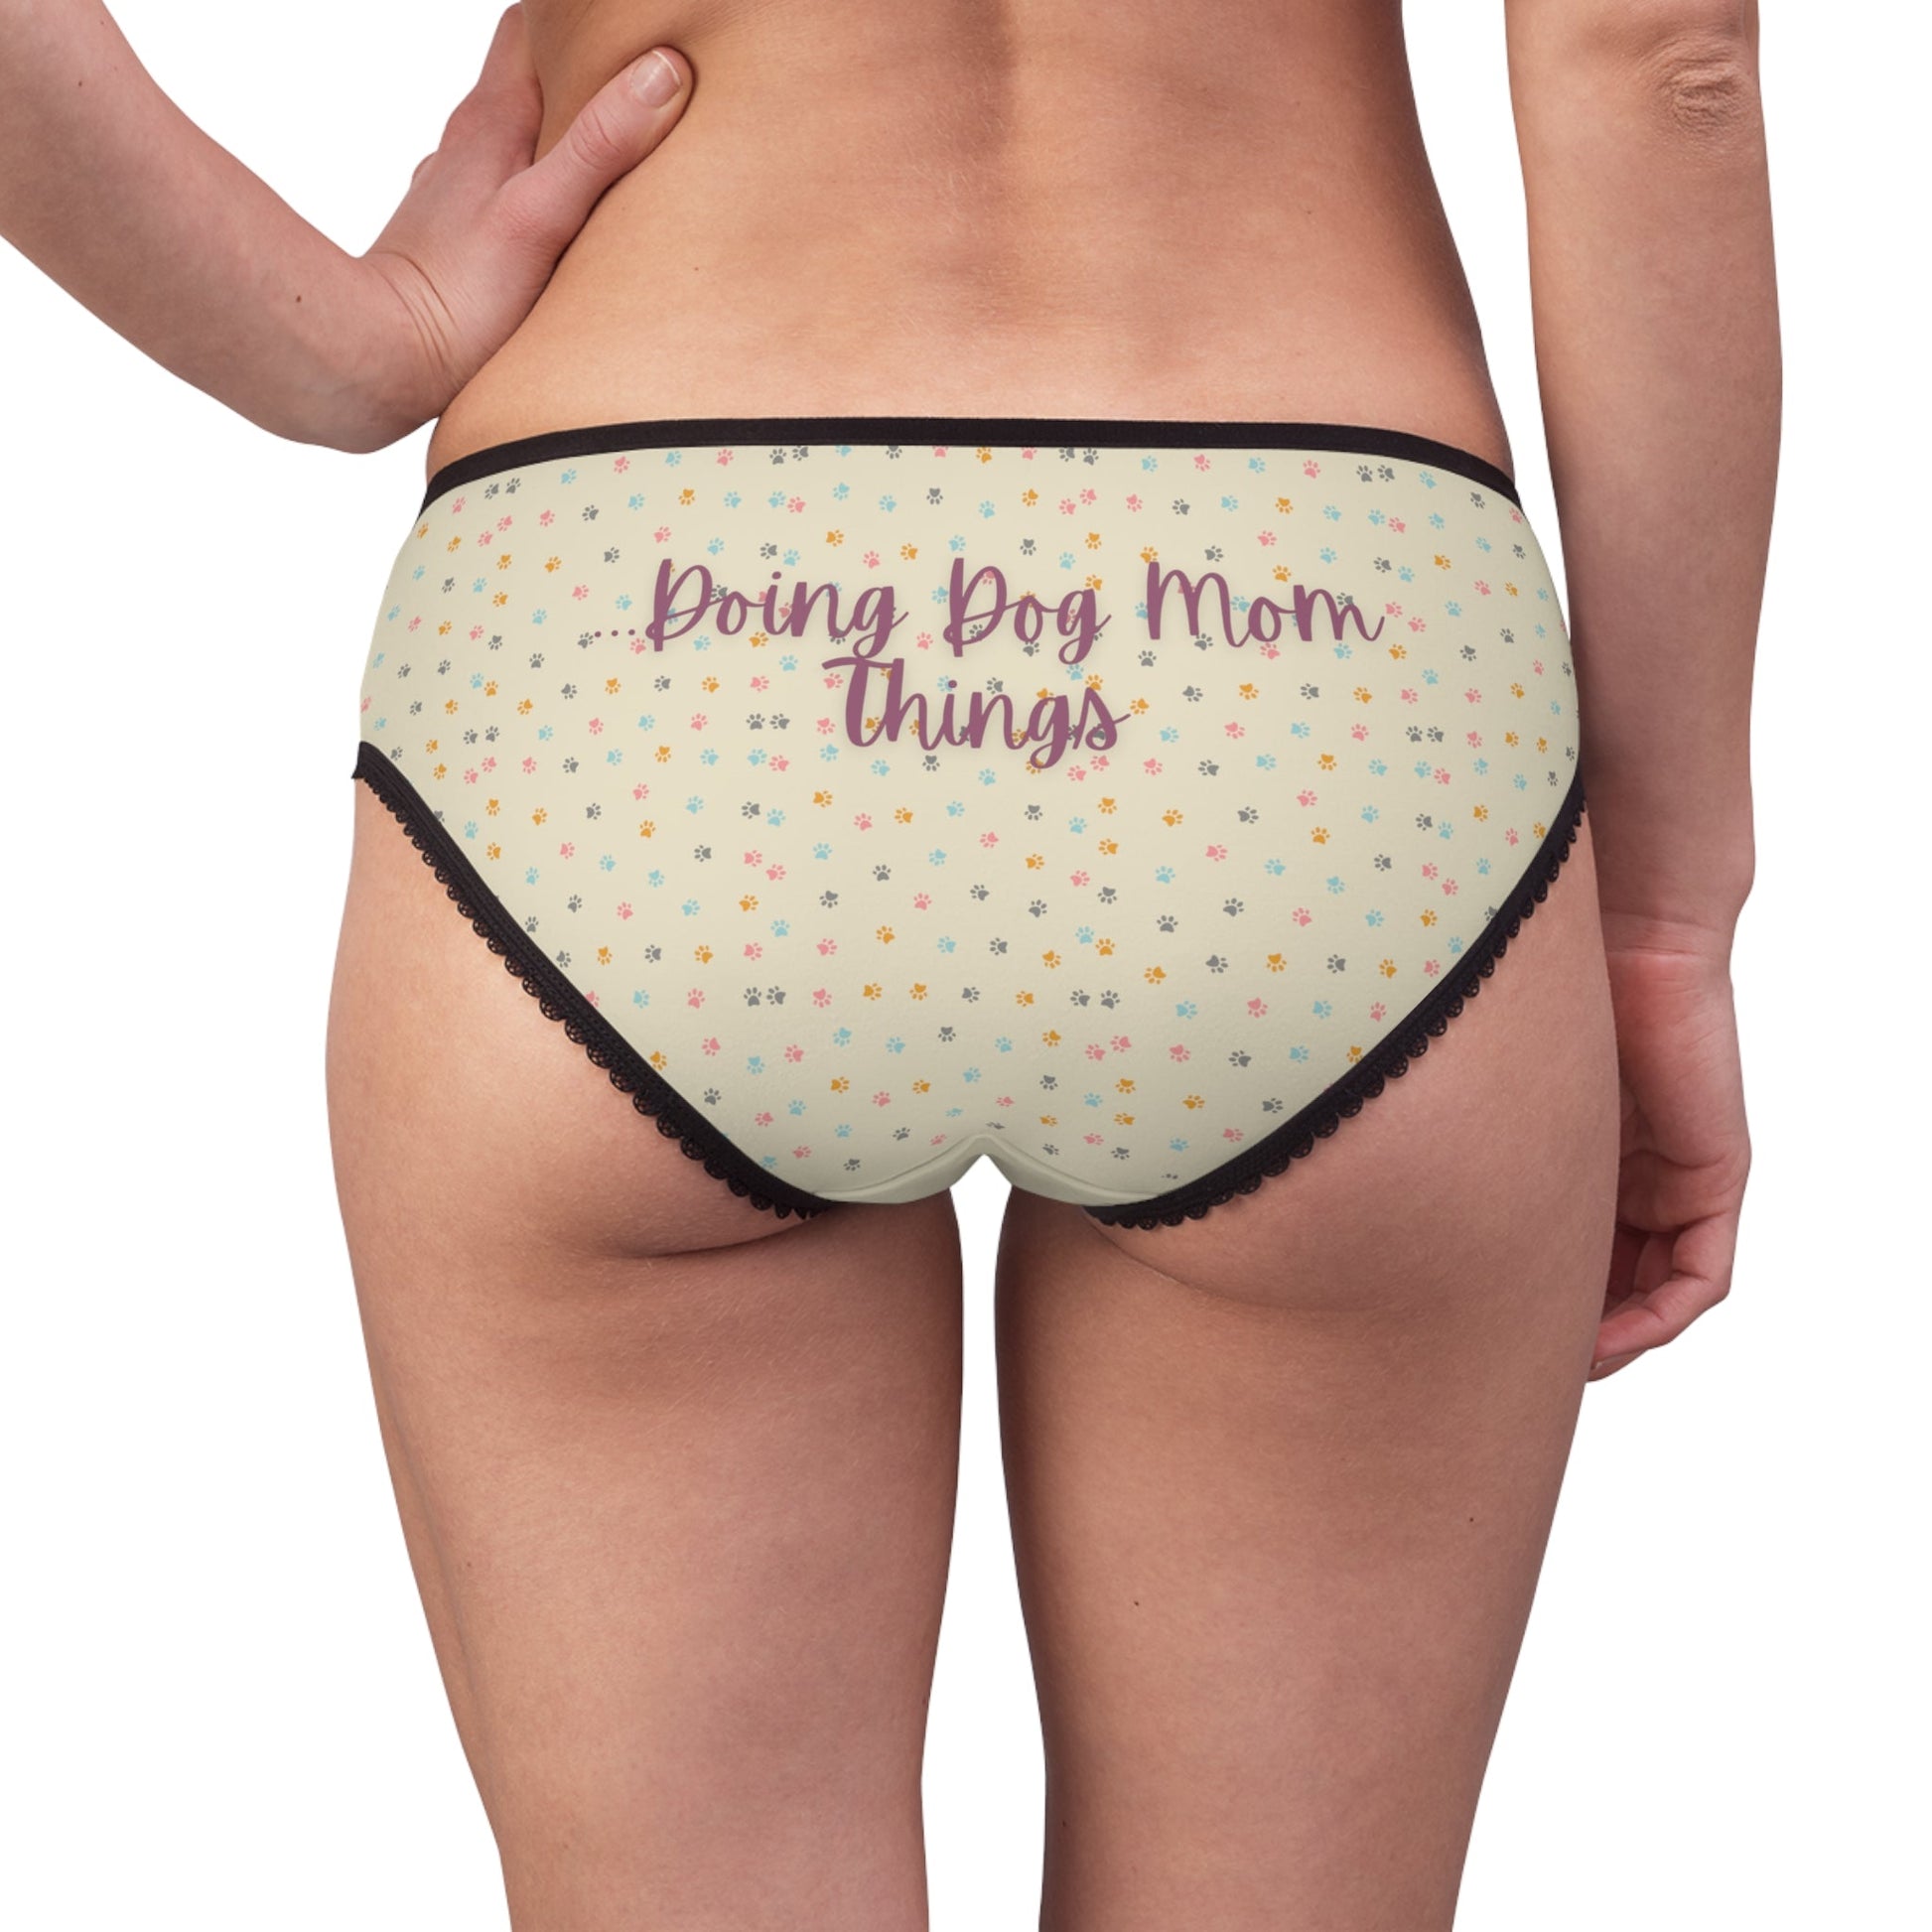 Doing Dog Mom Things Undies - All Over Prints